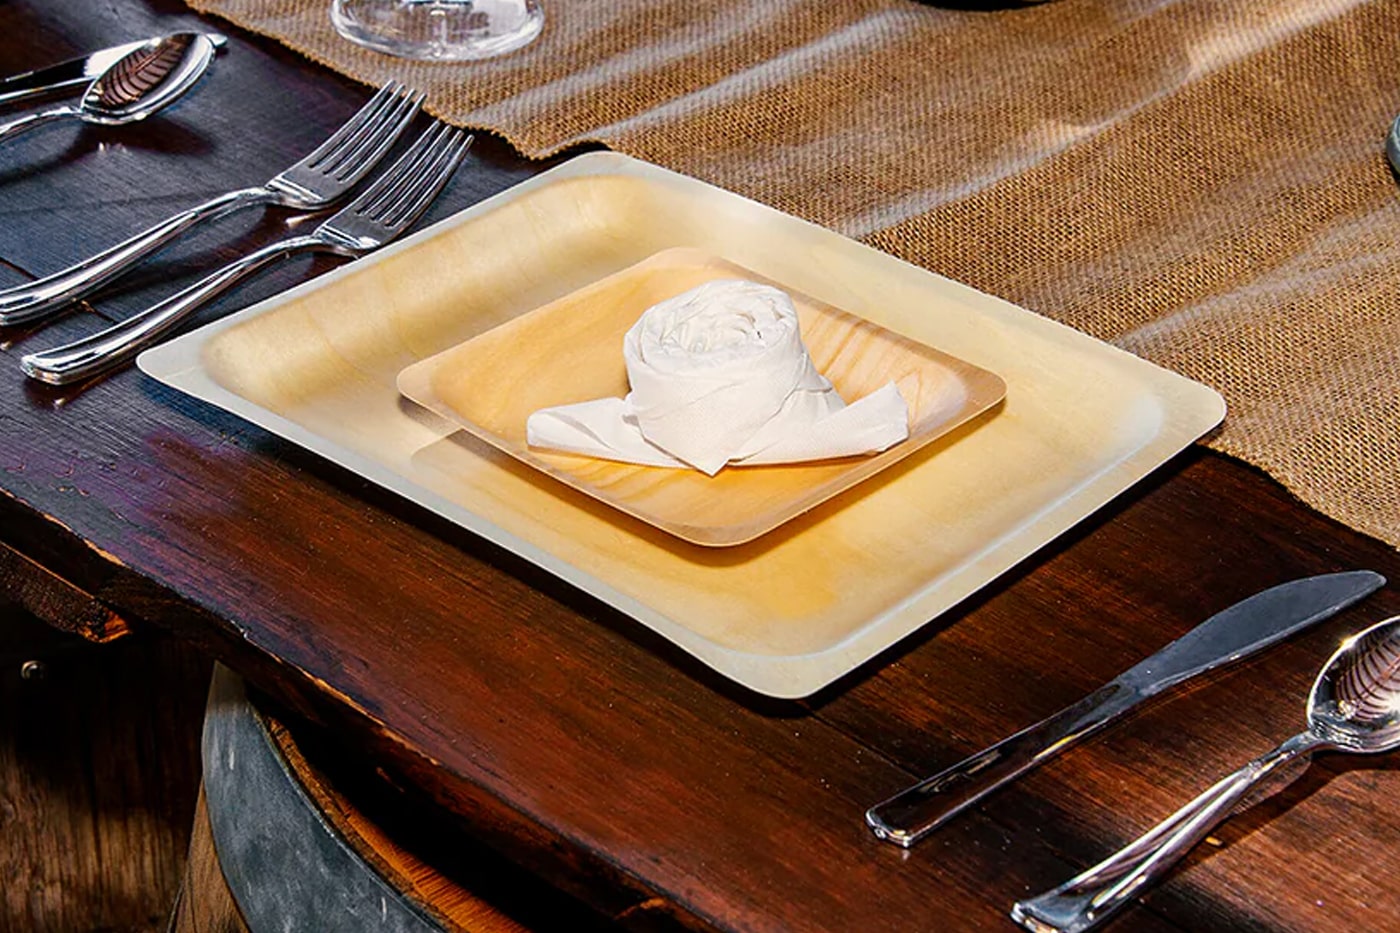 wooden plates, spoon and fork on the table